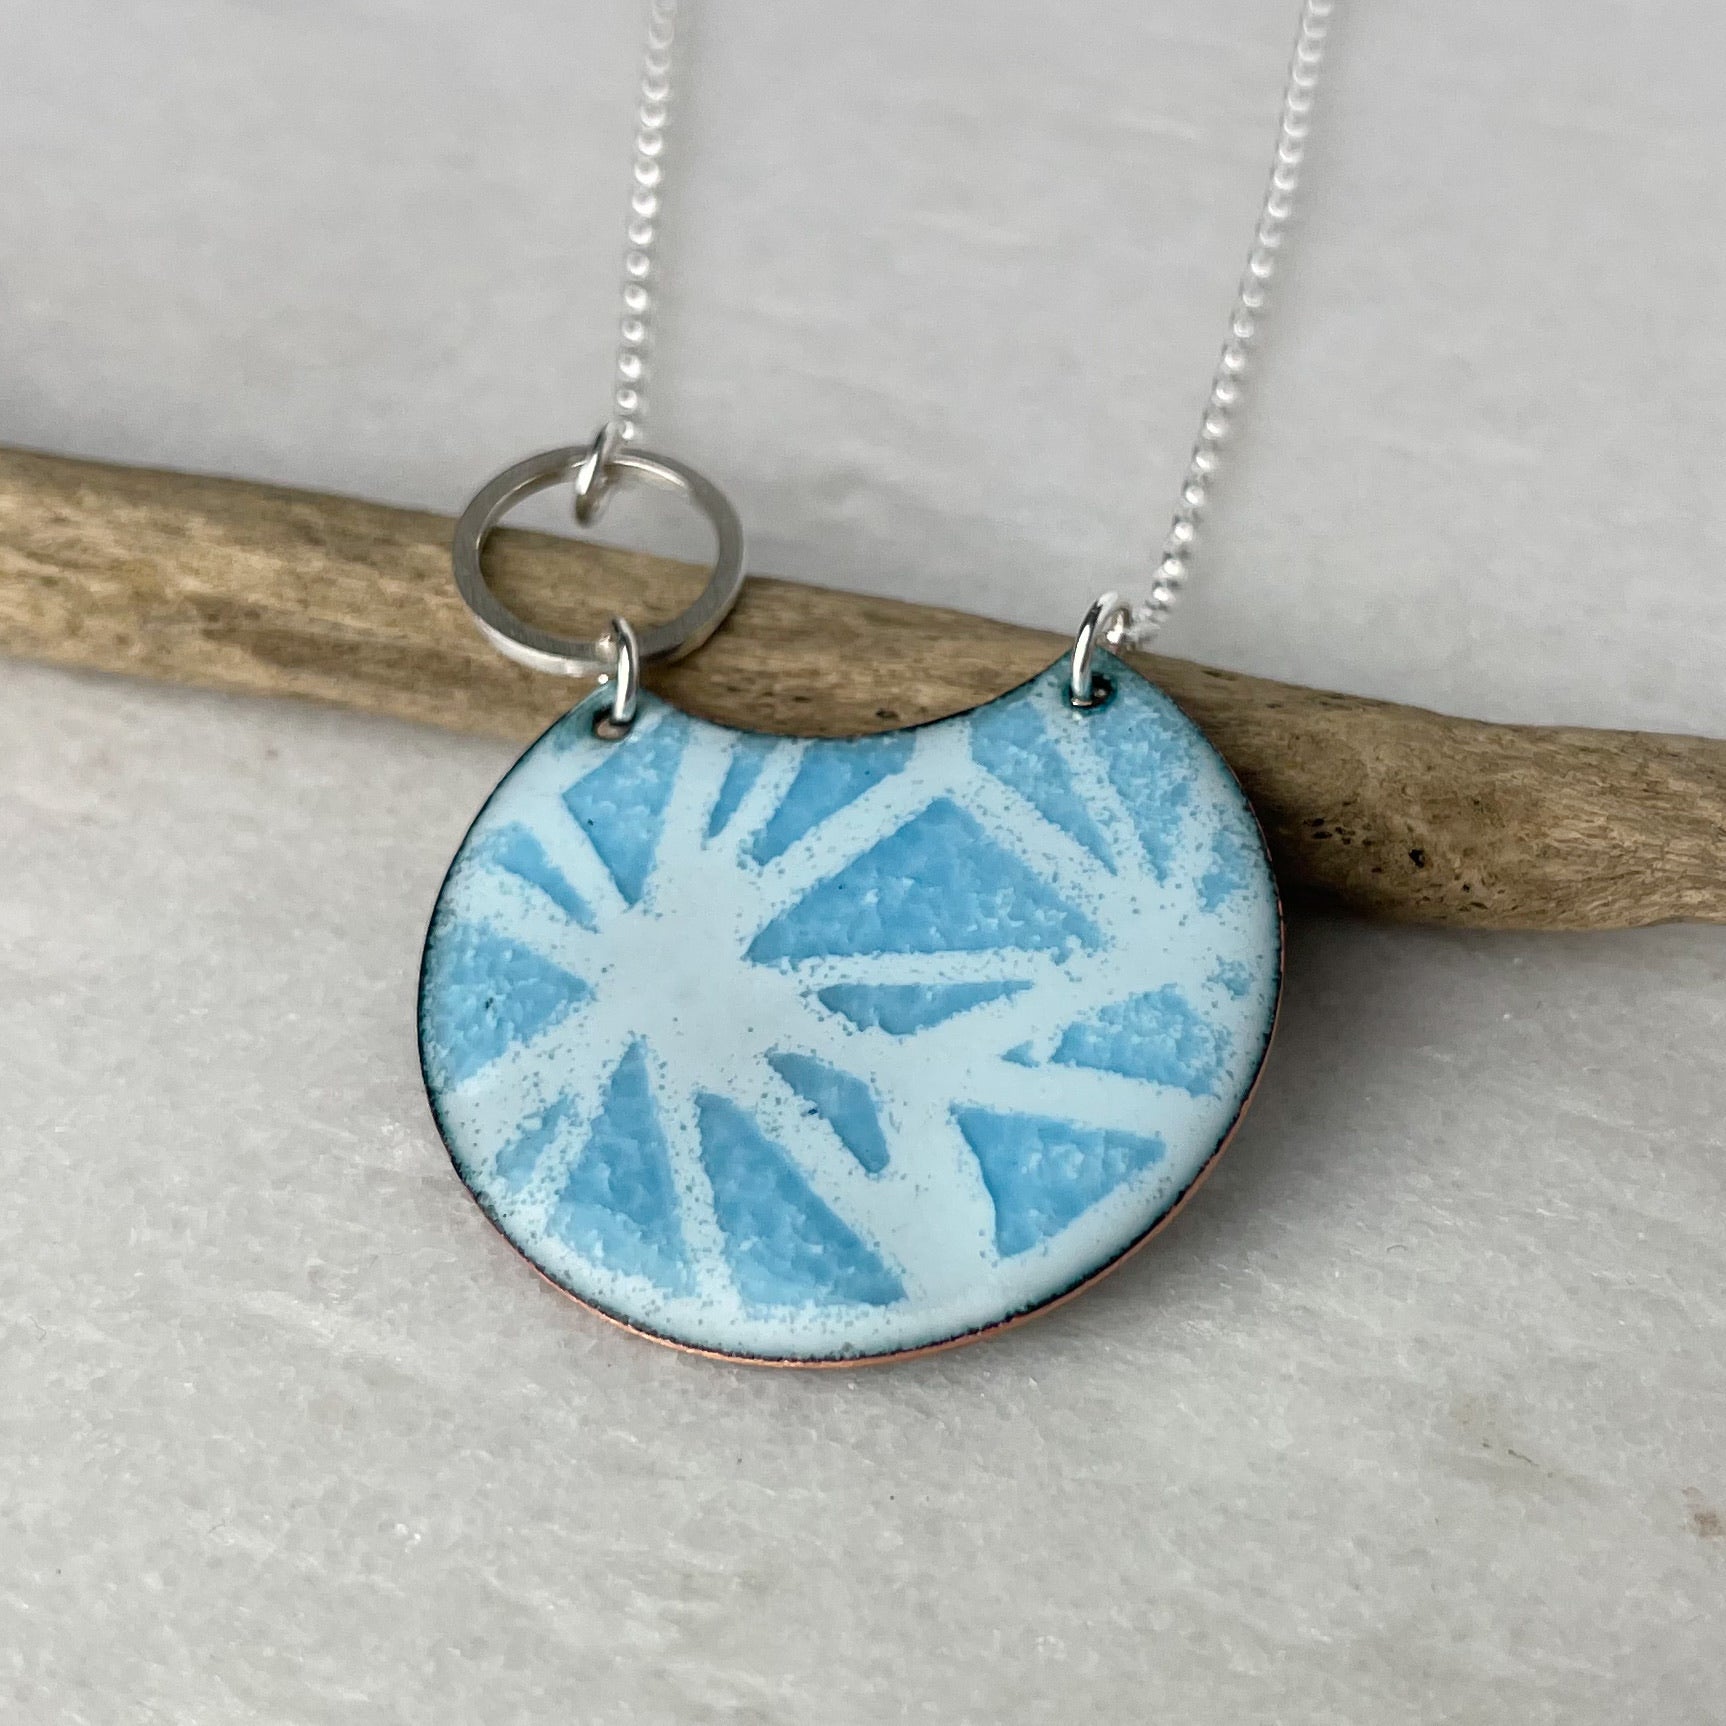 Turquoise Geometric Necklace - The Nancy Smillie Shop - Art, Jewellery & Designer Gifts Glasgow